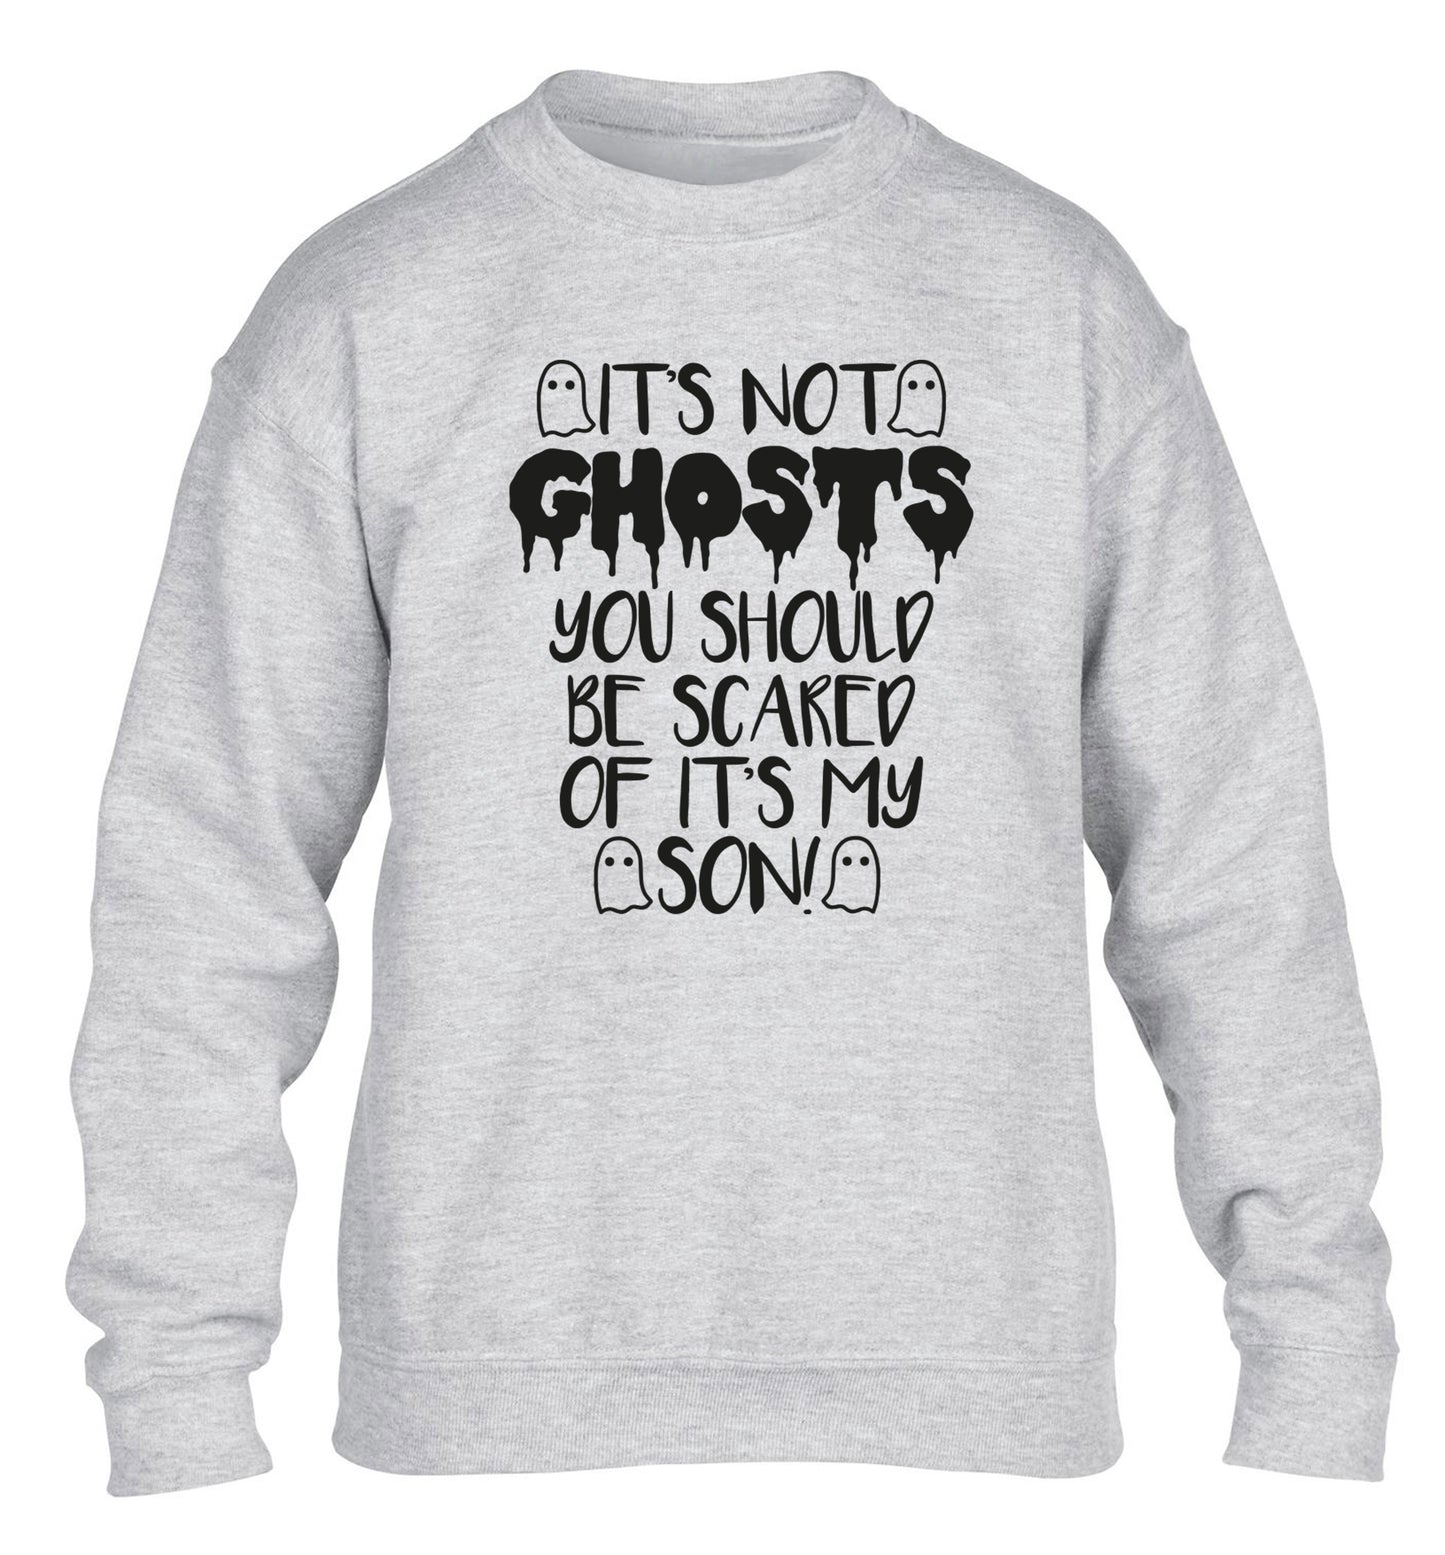 It's not ghosts you should be scared of it's my son! children's grey sweater 12-14 Years